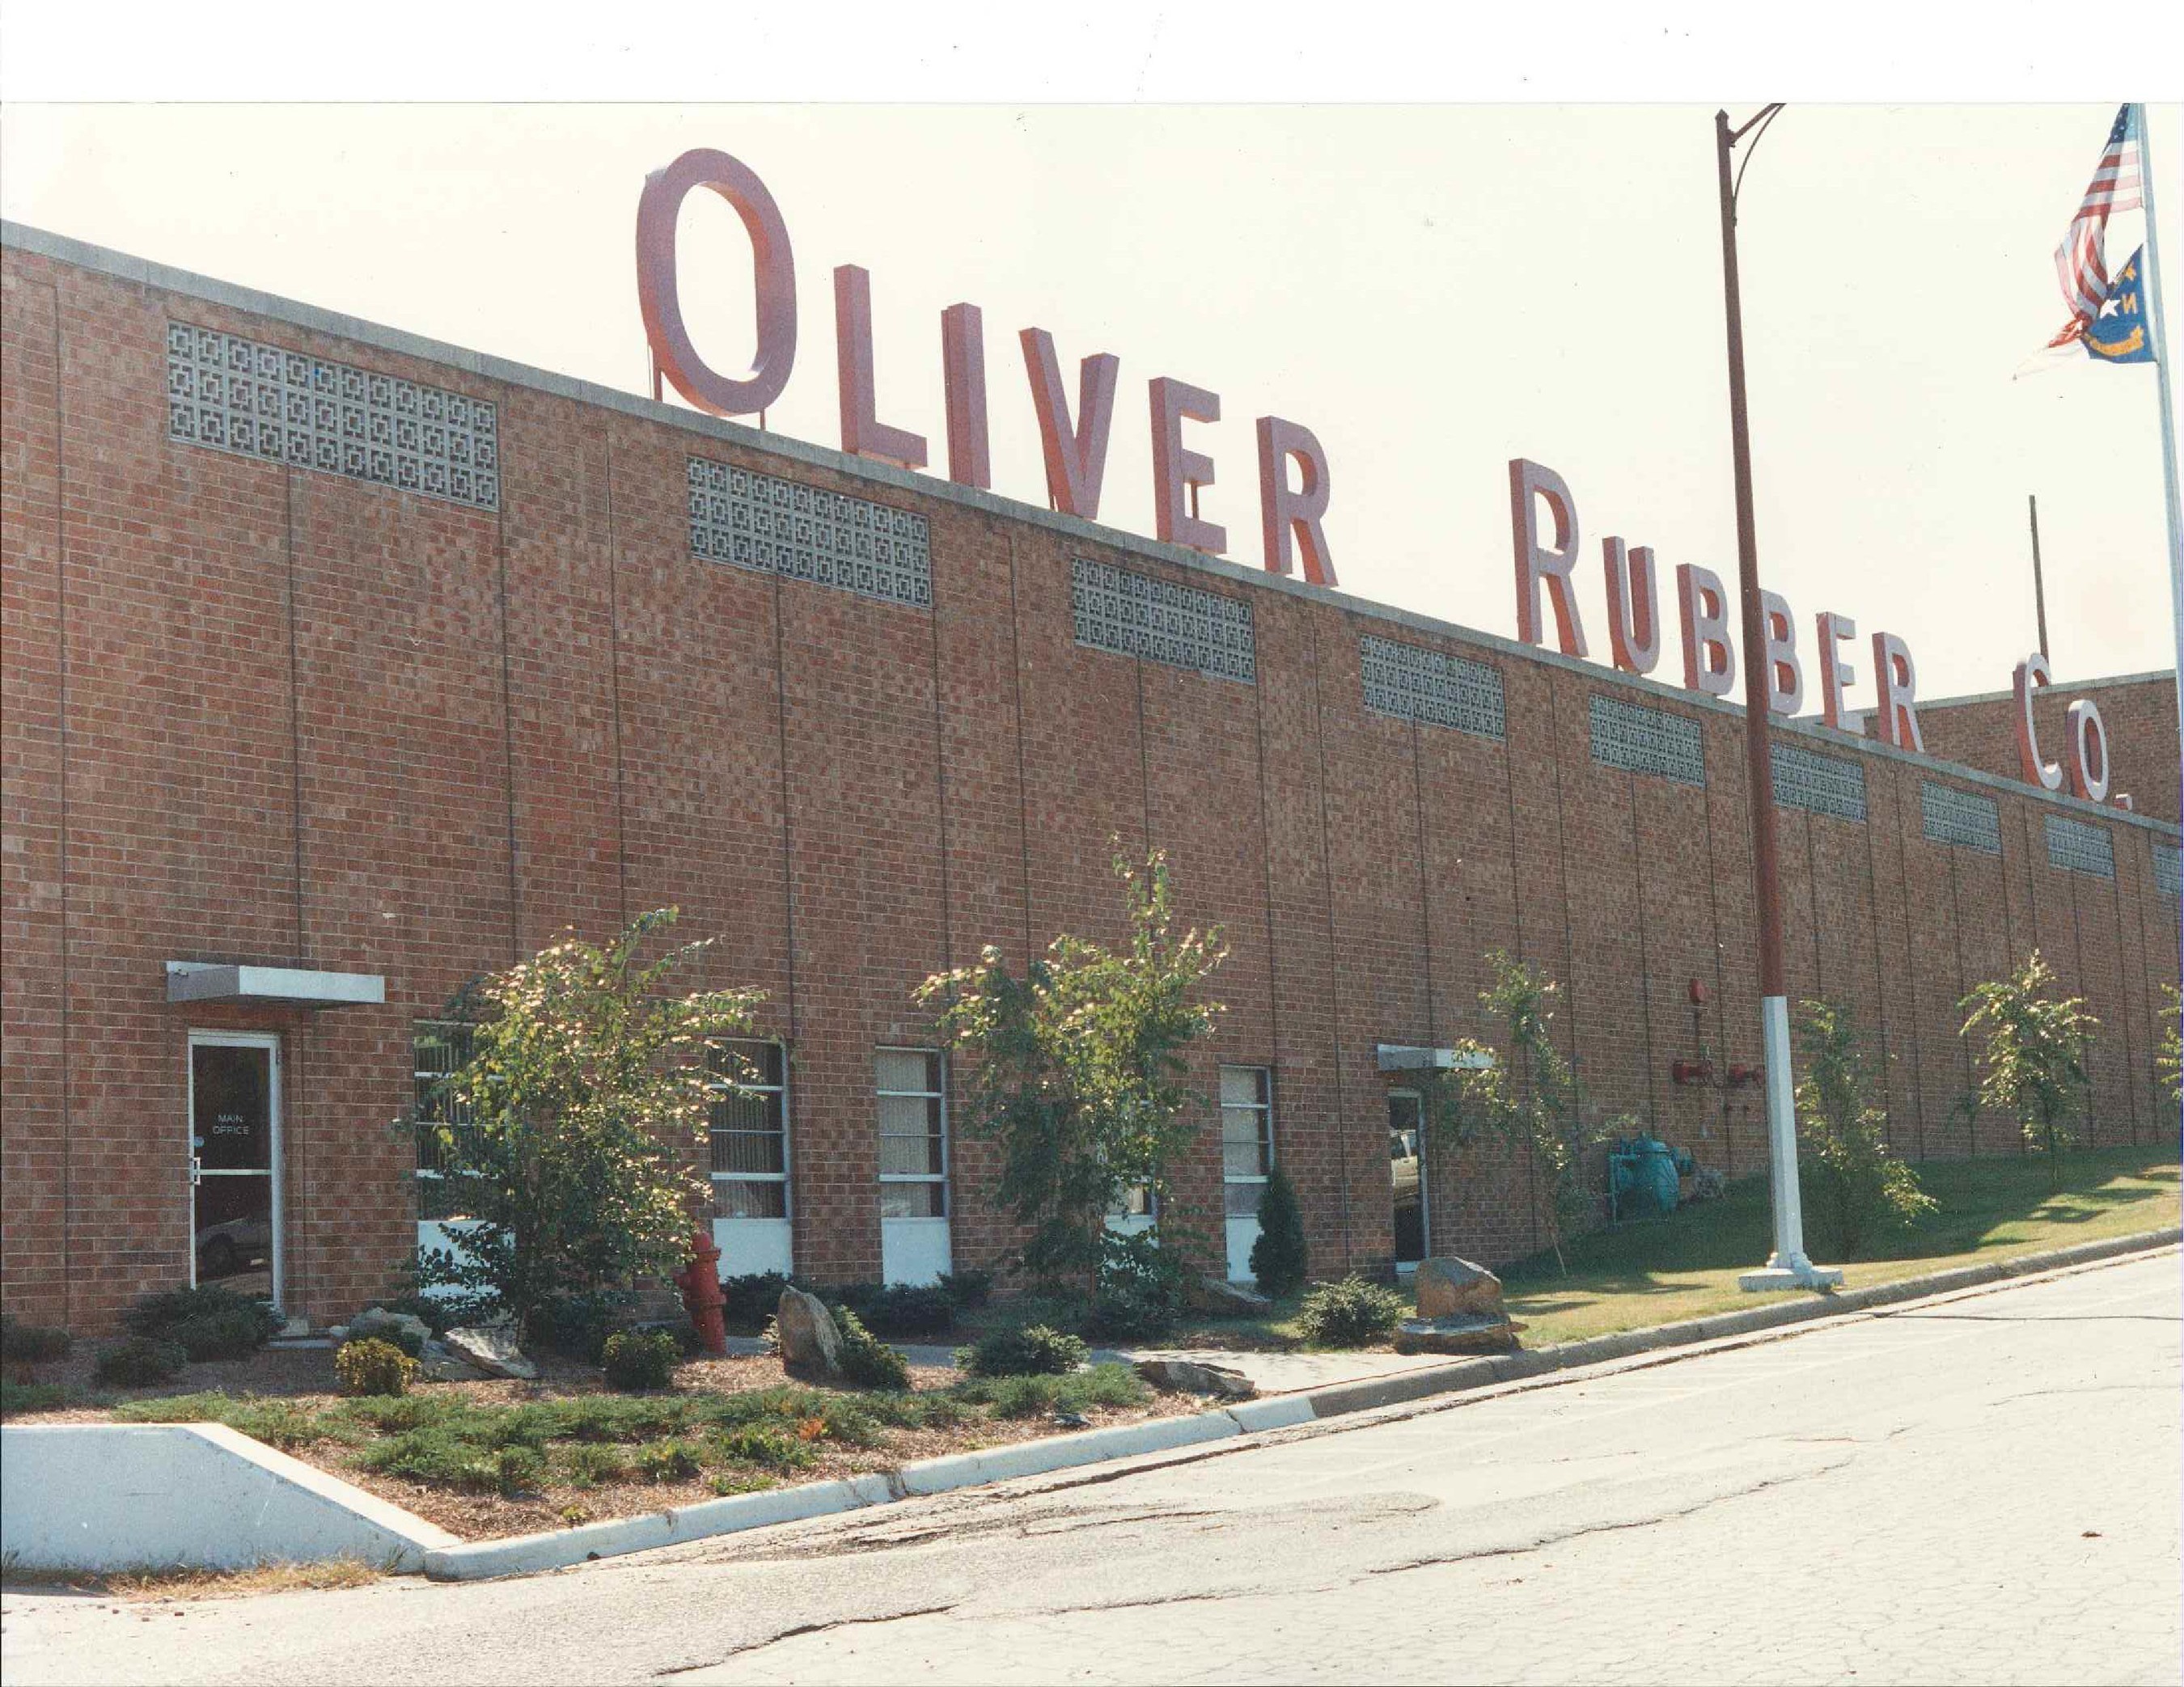 Oliver Rubber manufacturing facility located in Asheboro, N.C.